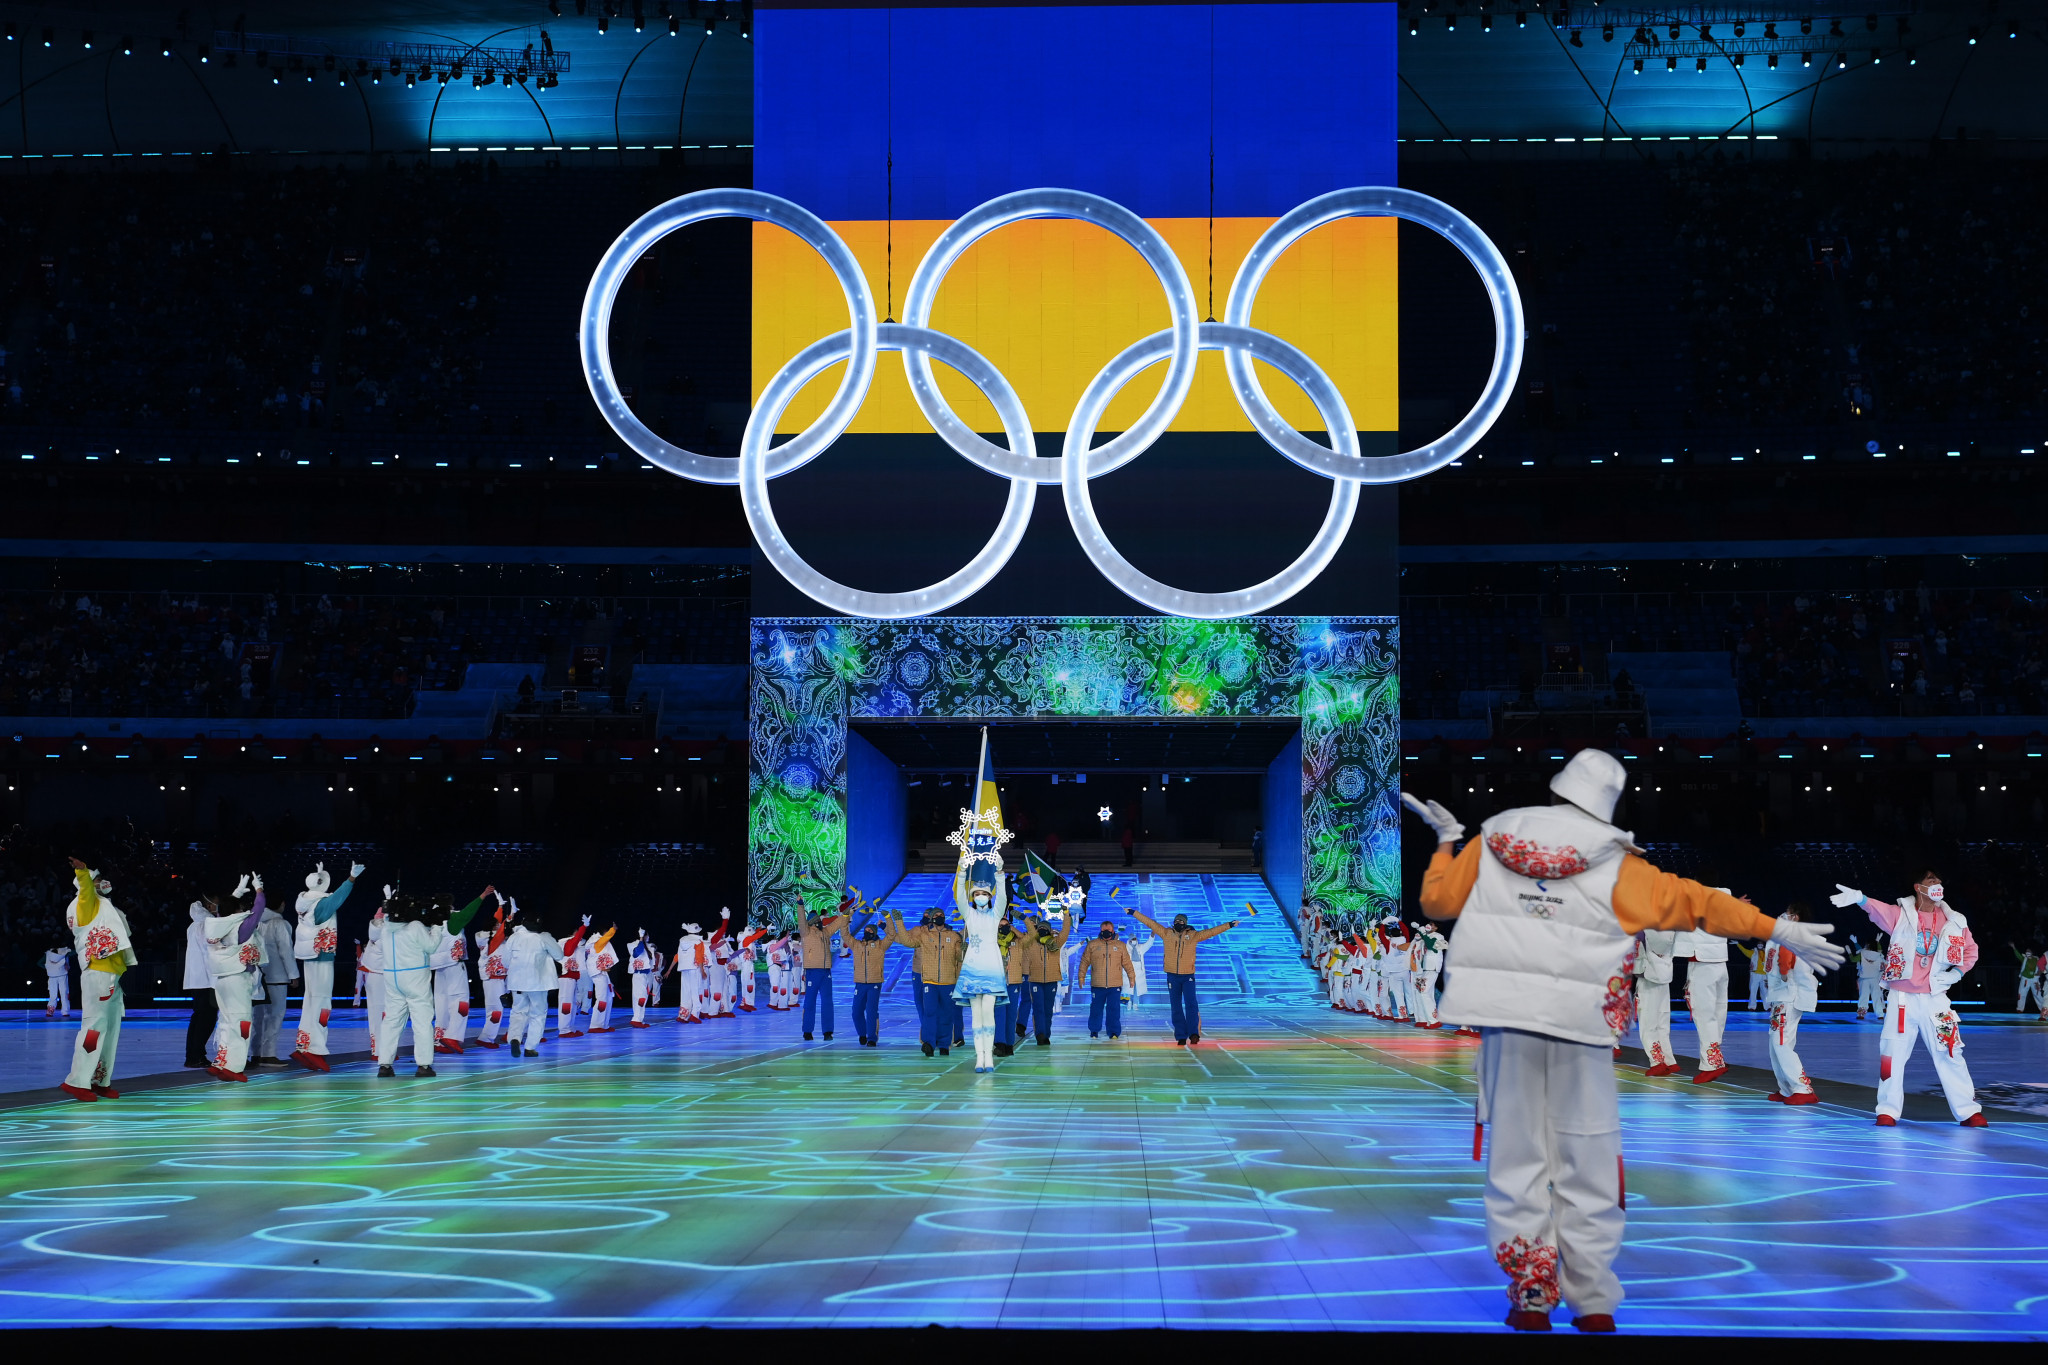 Bach reaffirms Ukraine support but insists IOC must "overcome this dilemma" on Russia and Belarus participation